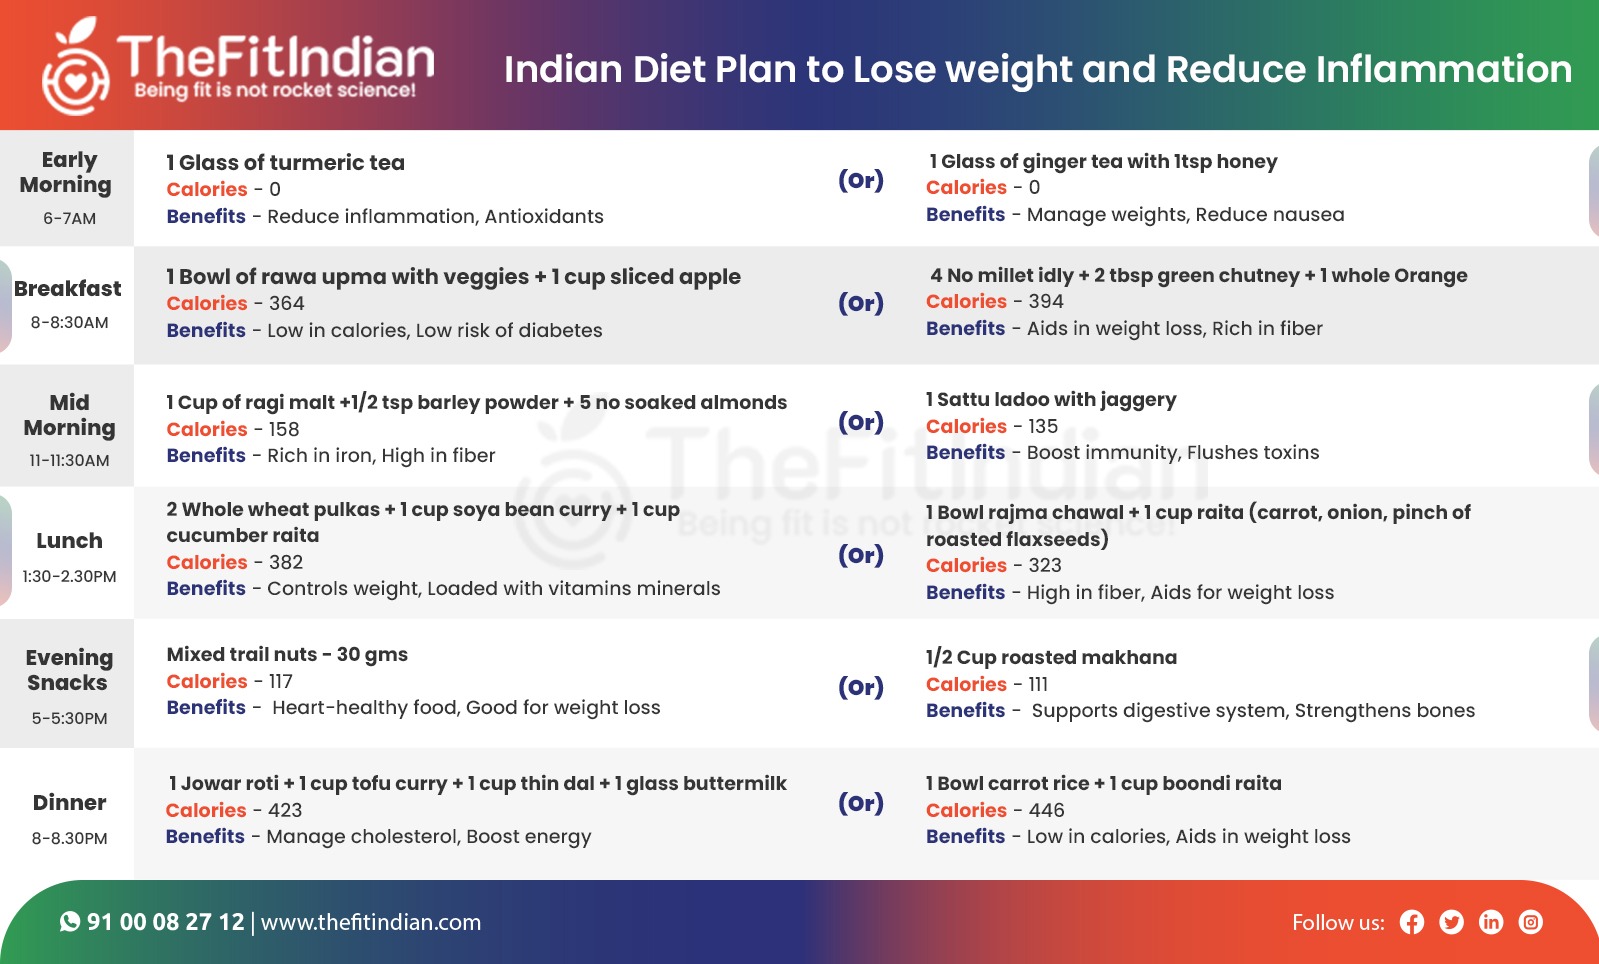 Diet plan to reduce inflammation and overweight